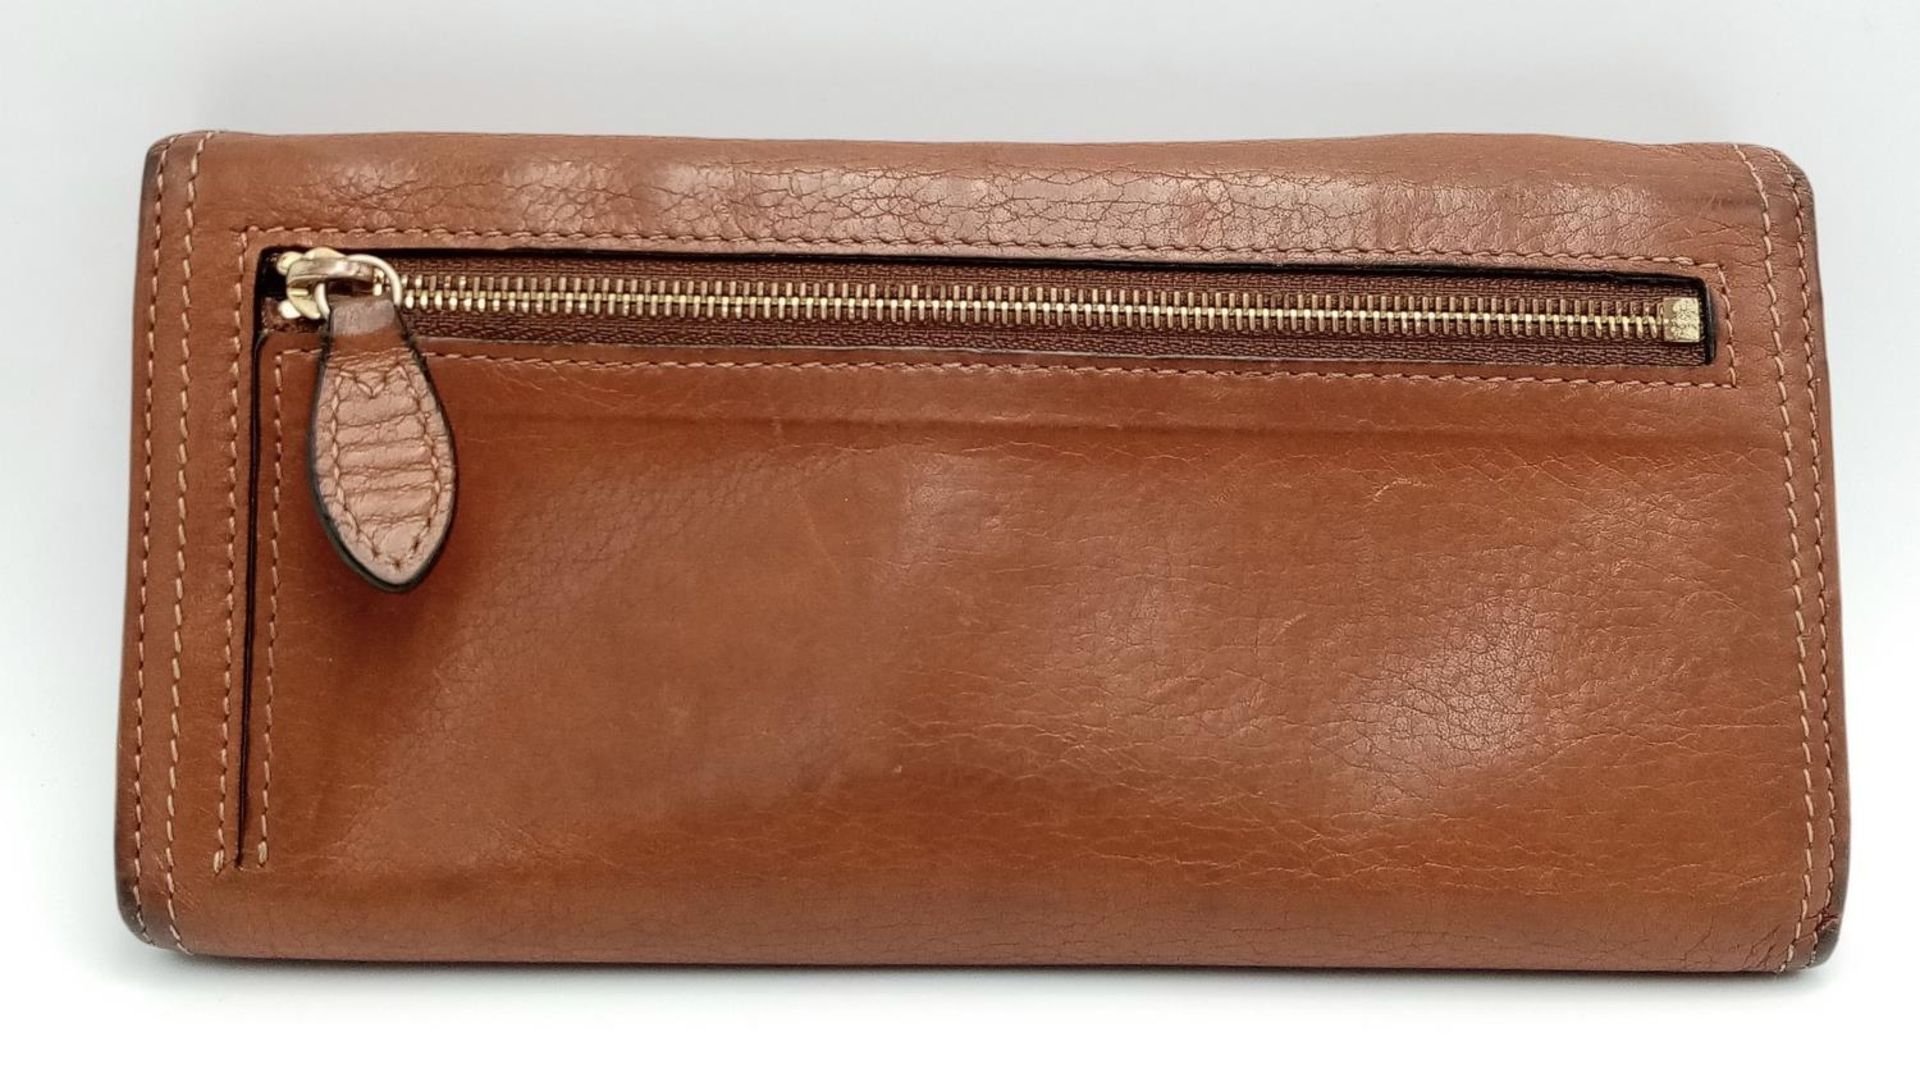 A Mulberry Brown Daria Continental Wallet. Leather exterior with gold-toned hardware, a zipped - Bild 5 aus 7